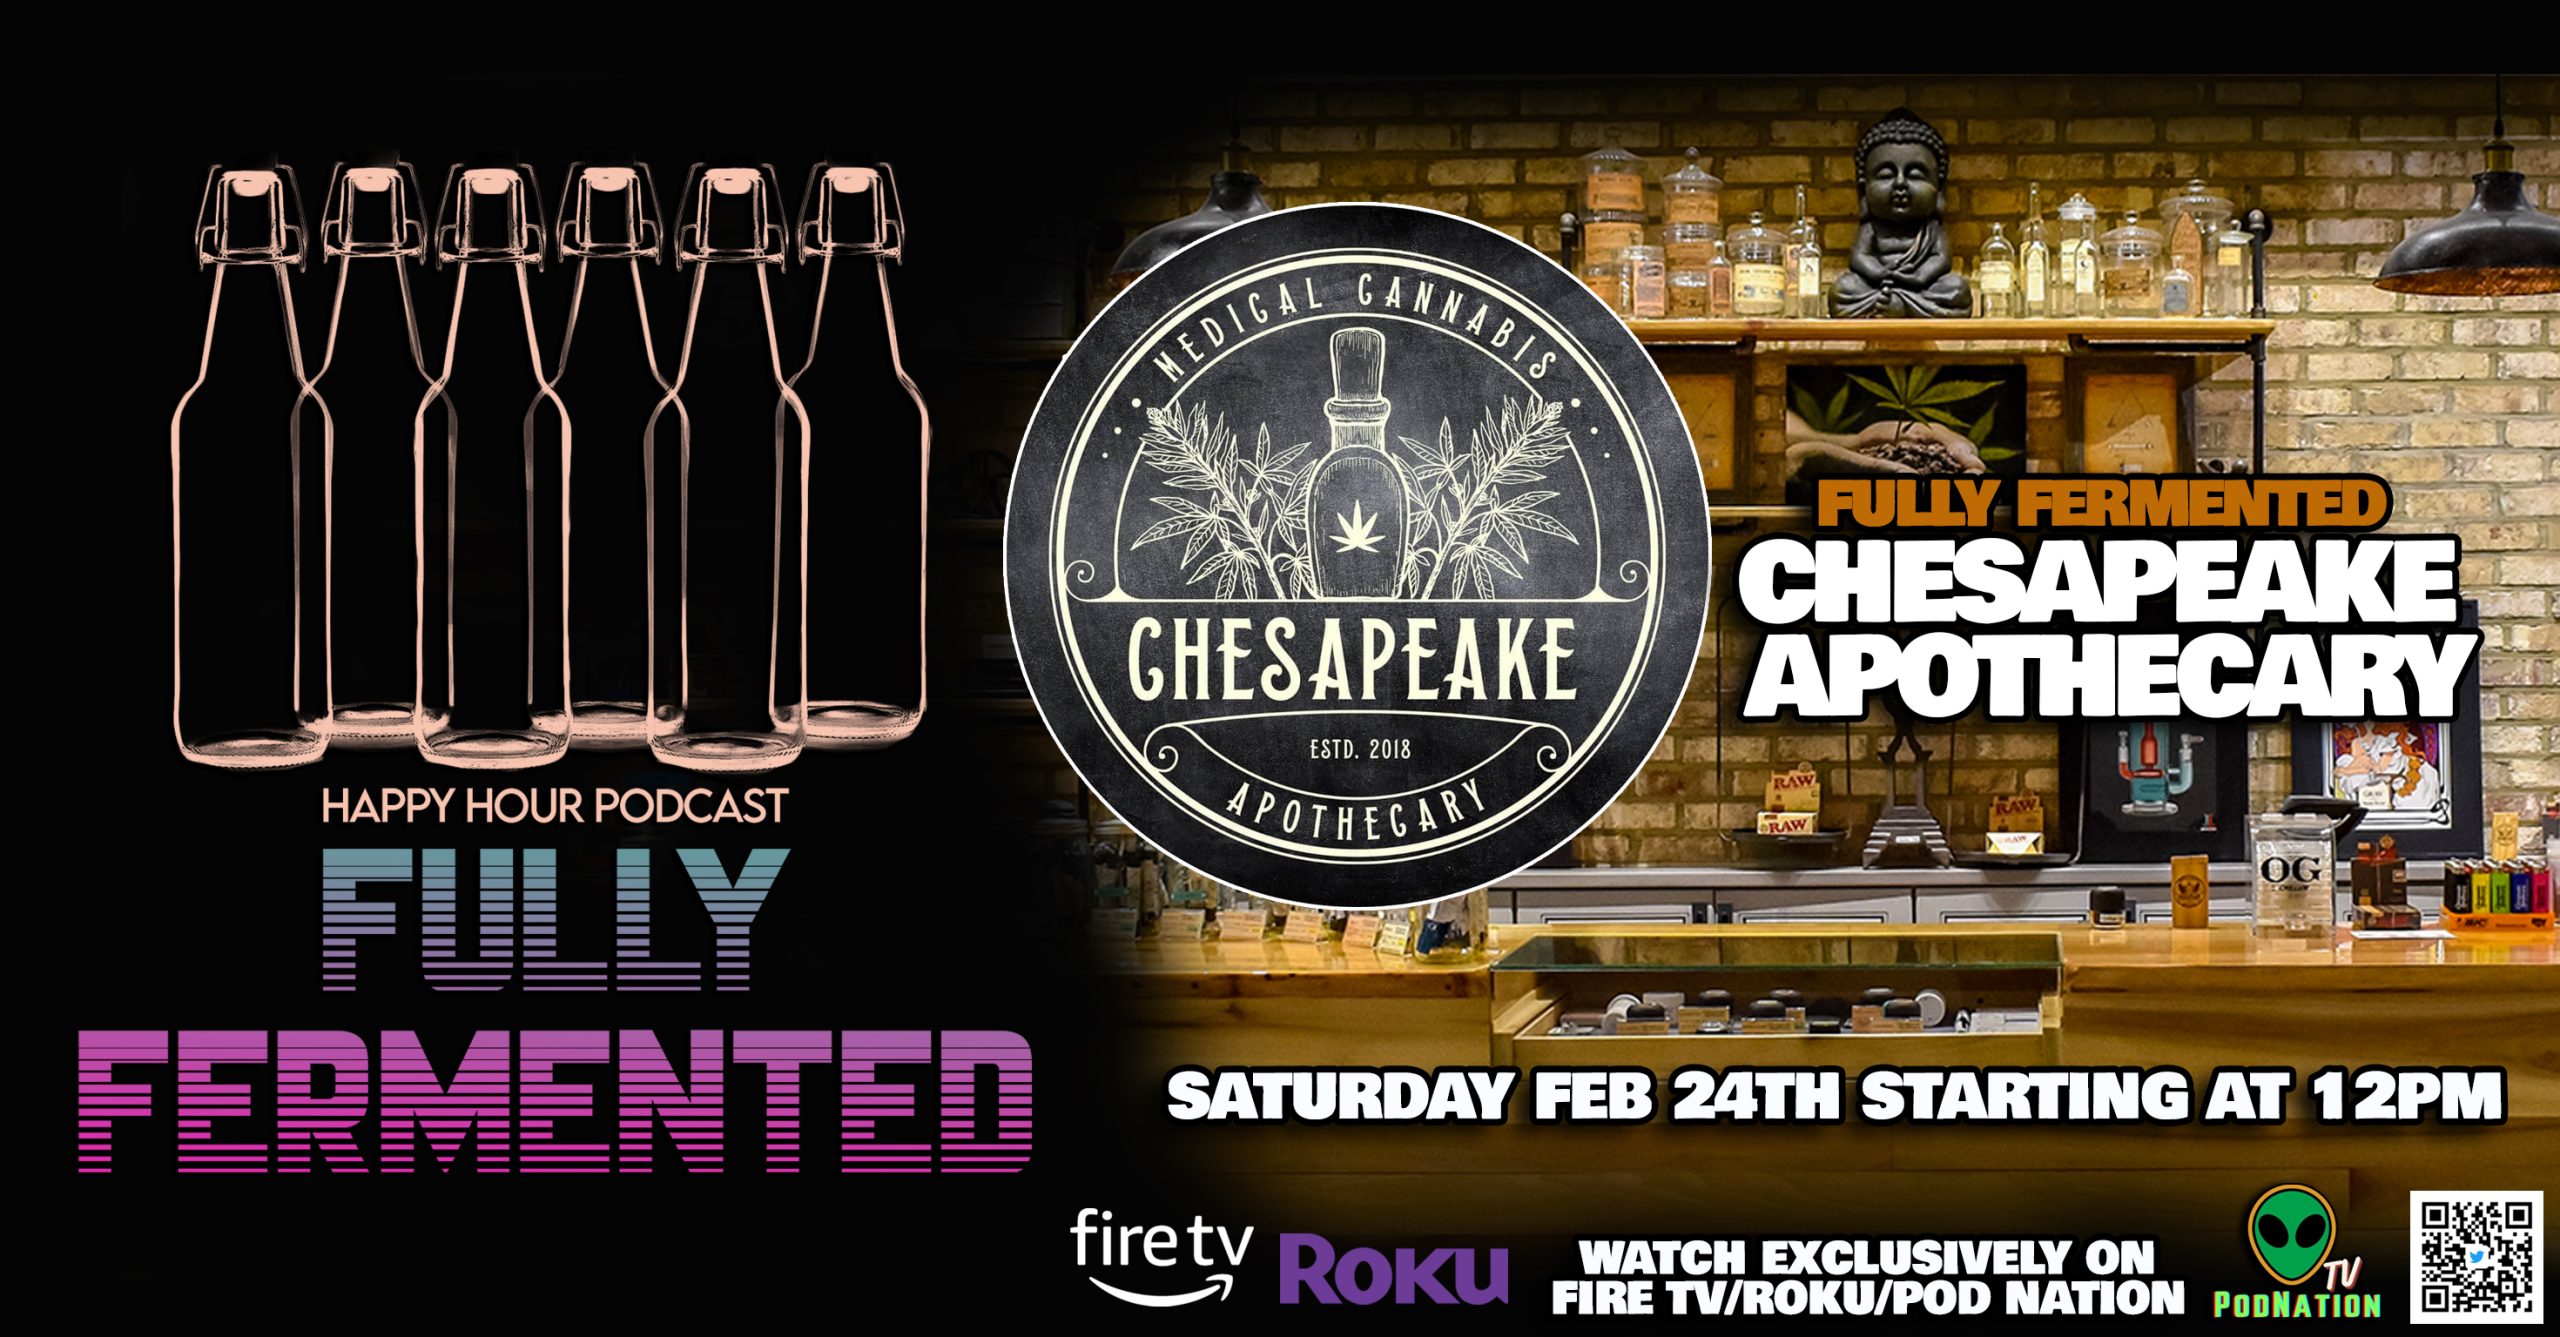 The Guys will be on hand at Chesapeake Apothecary this Saturday around 12pm. They will be featuring then on The HHPod's Fully Fermented to Air Exclusively on Roku & Fire TV. Come out and say hello!